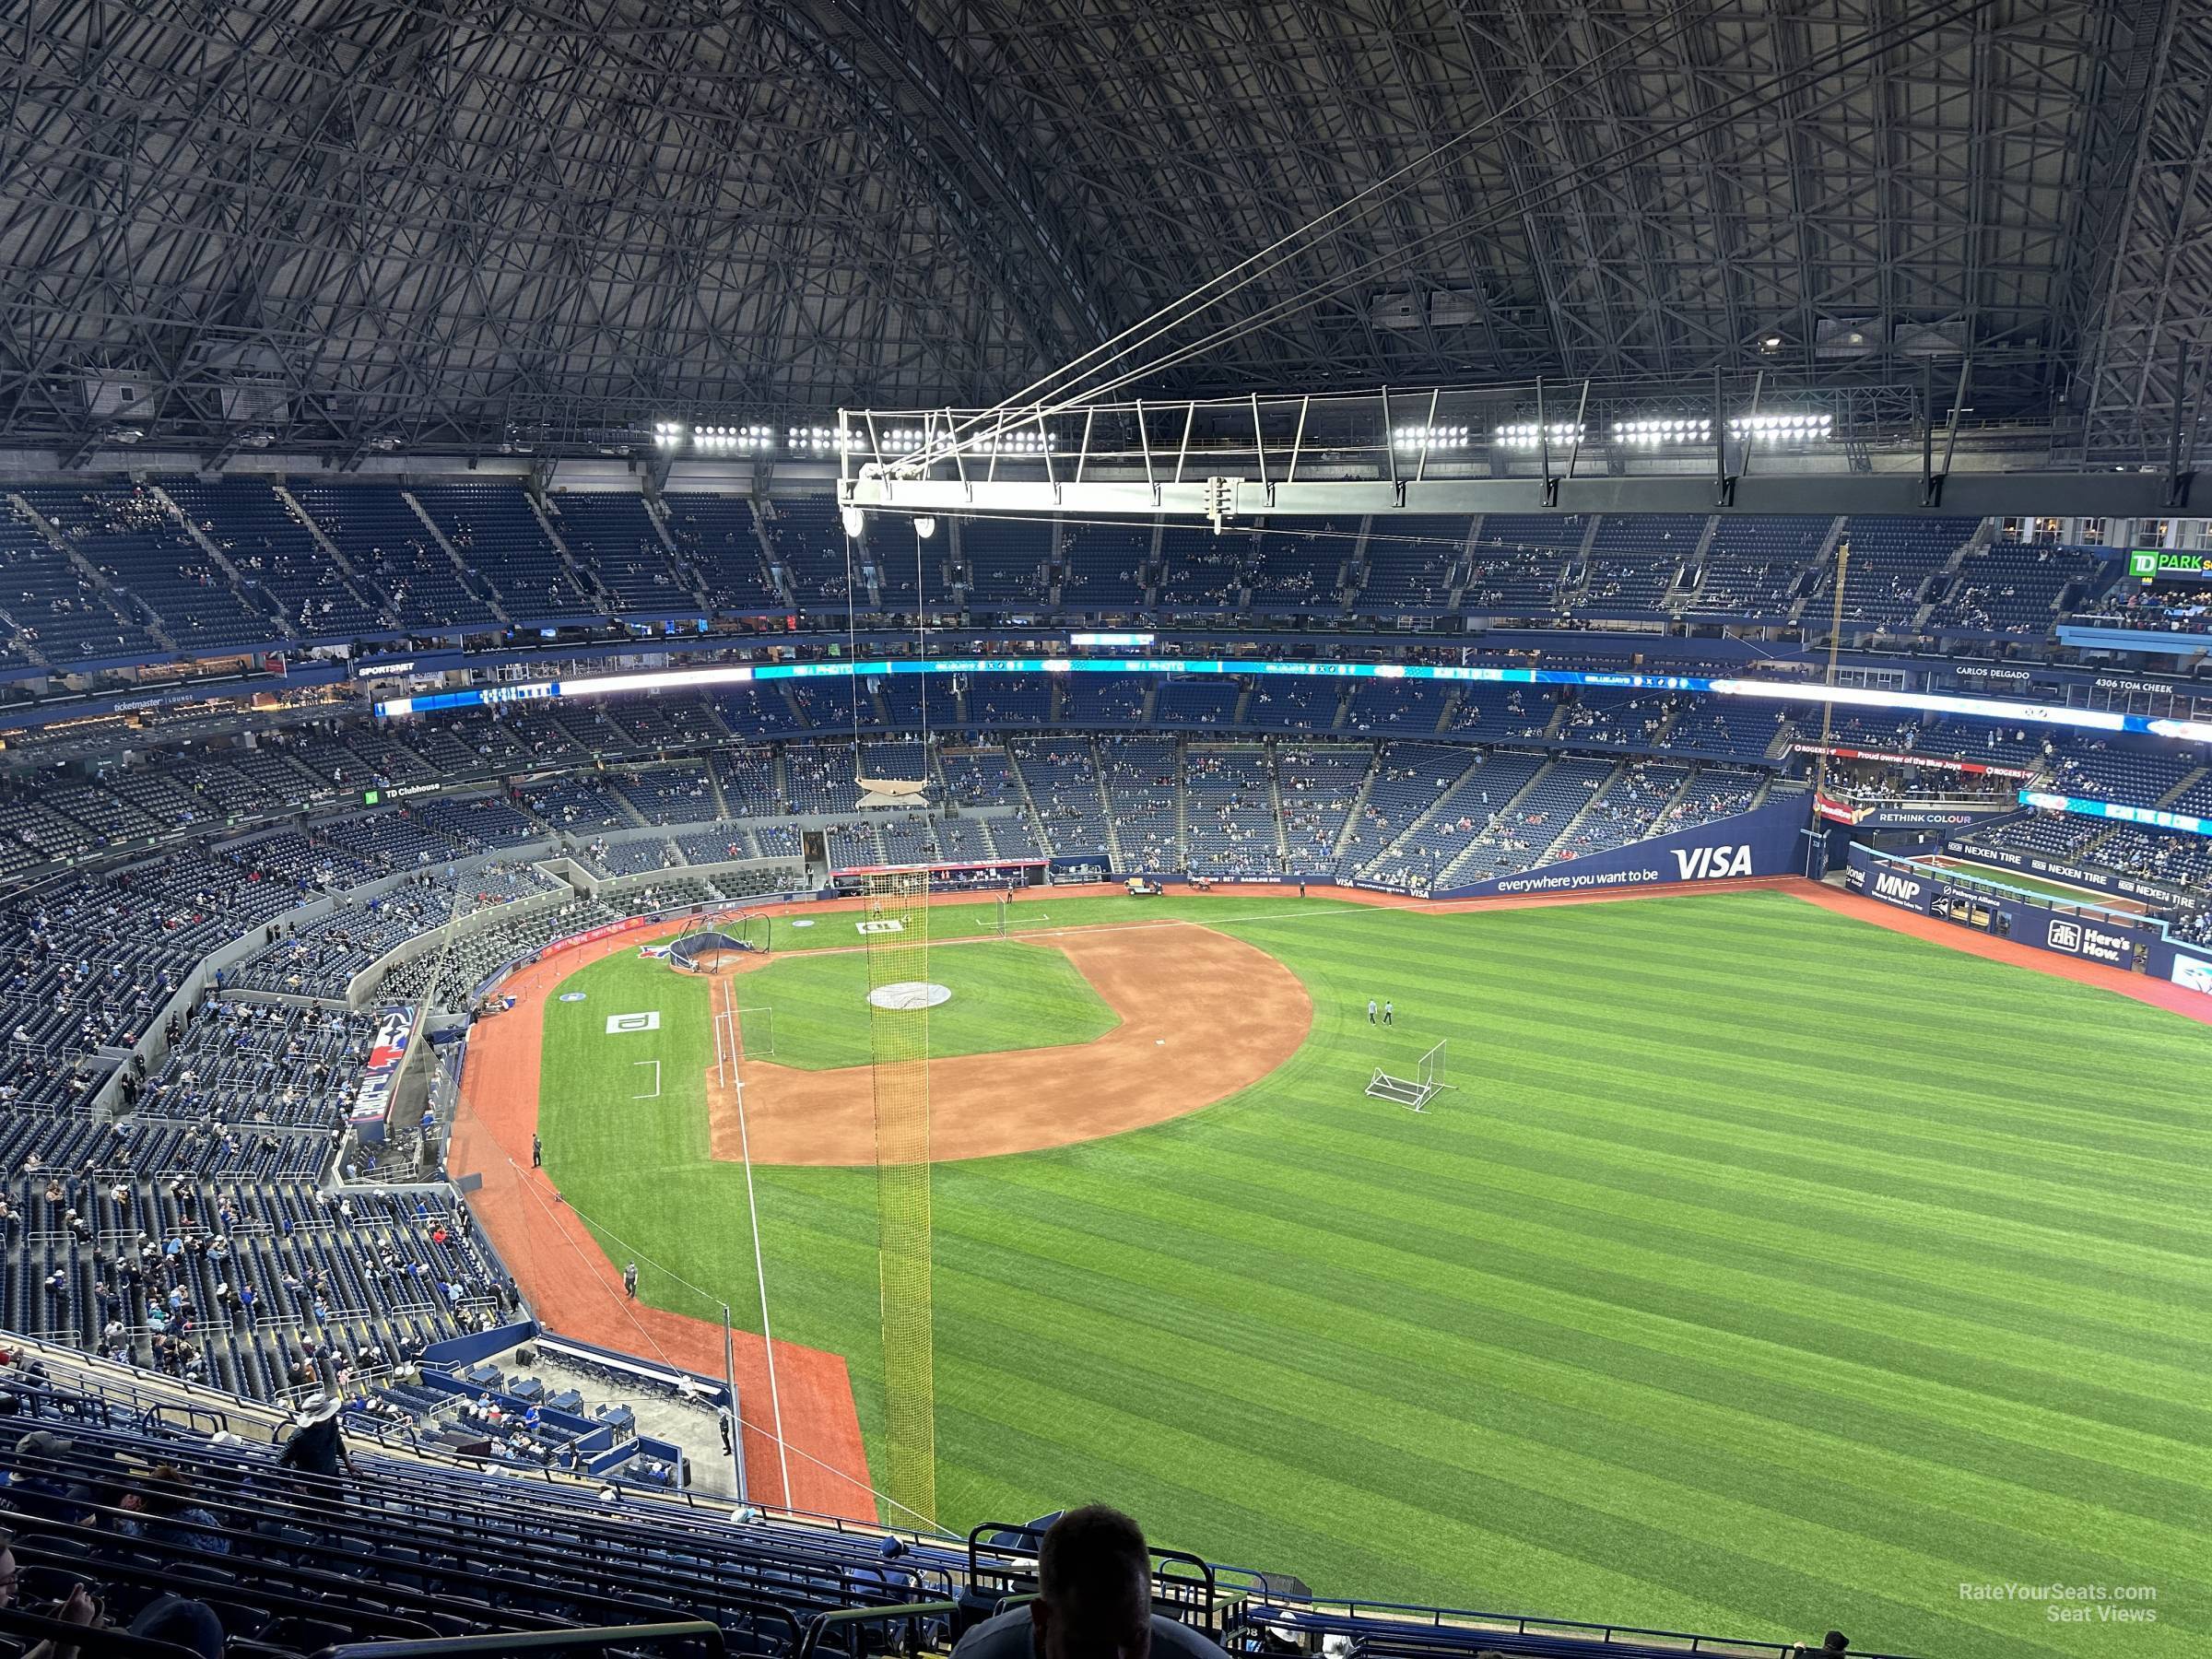 section 508, row 20 seat view  for baseball - rogers centre